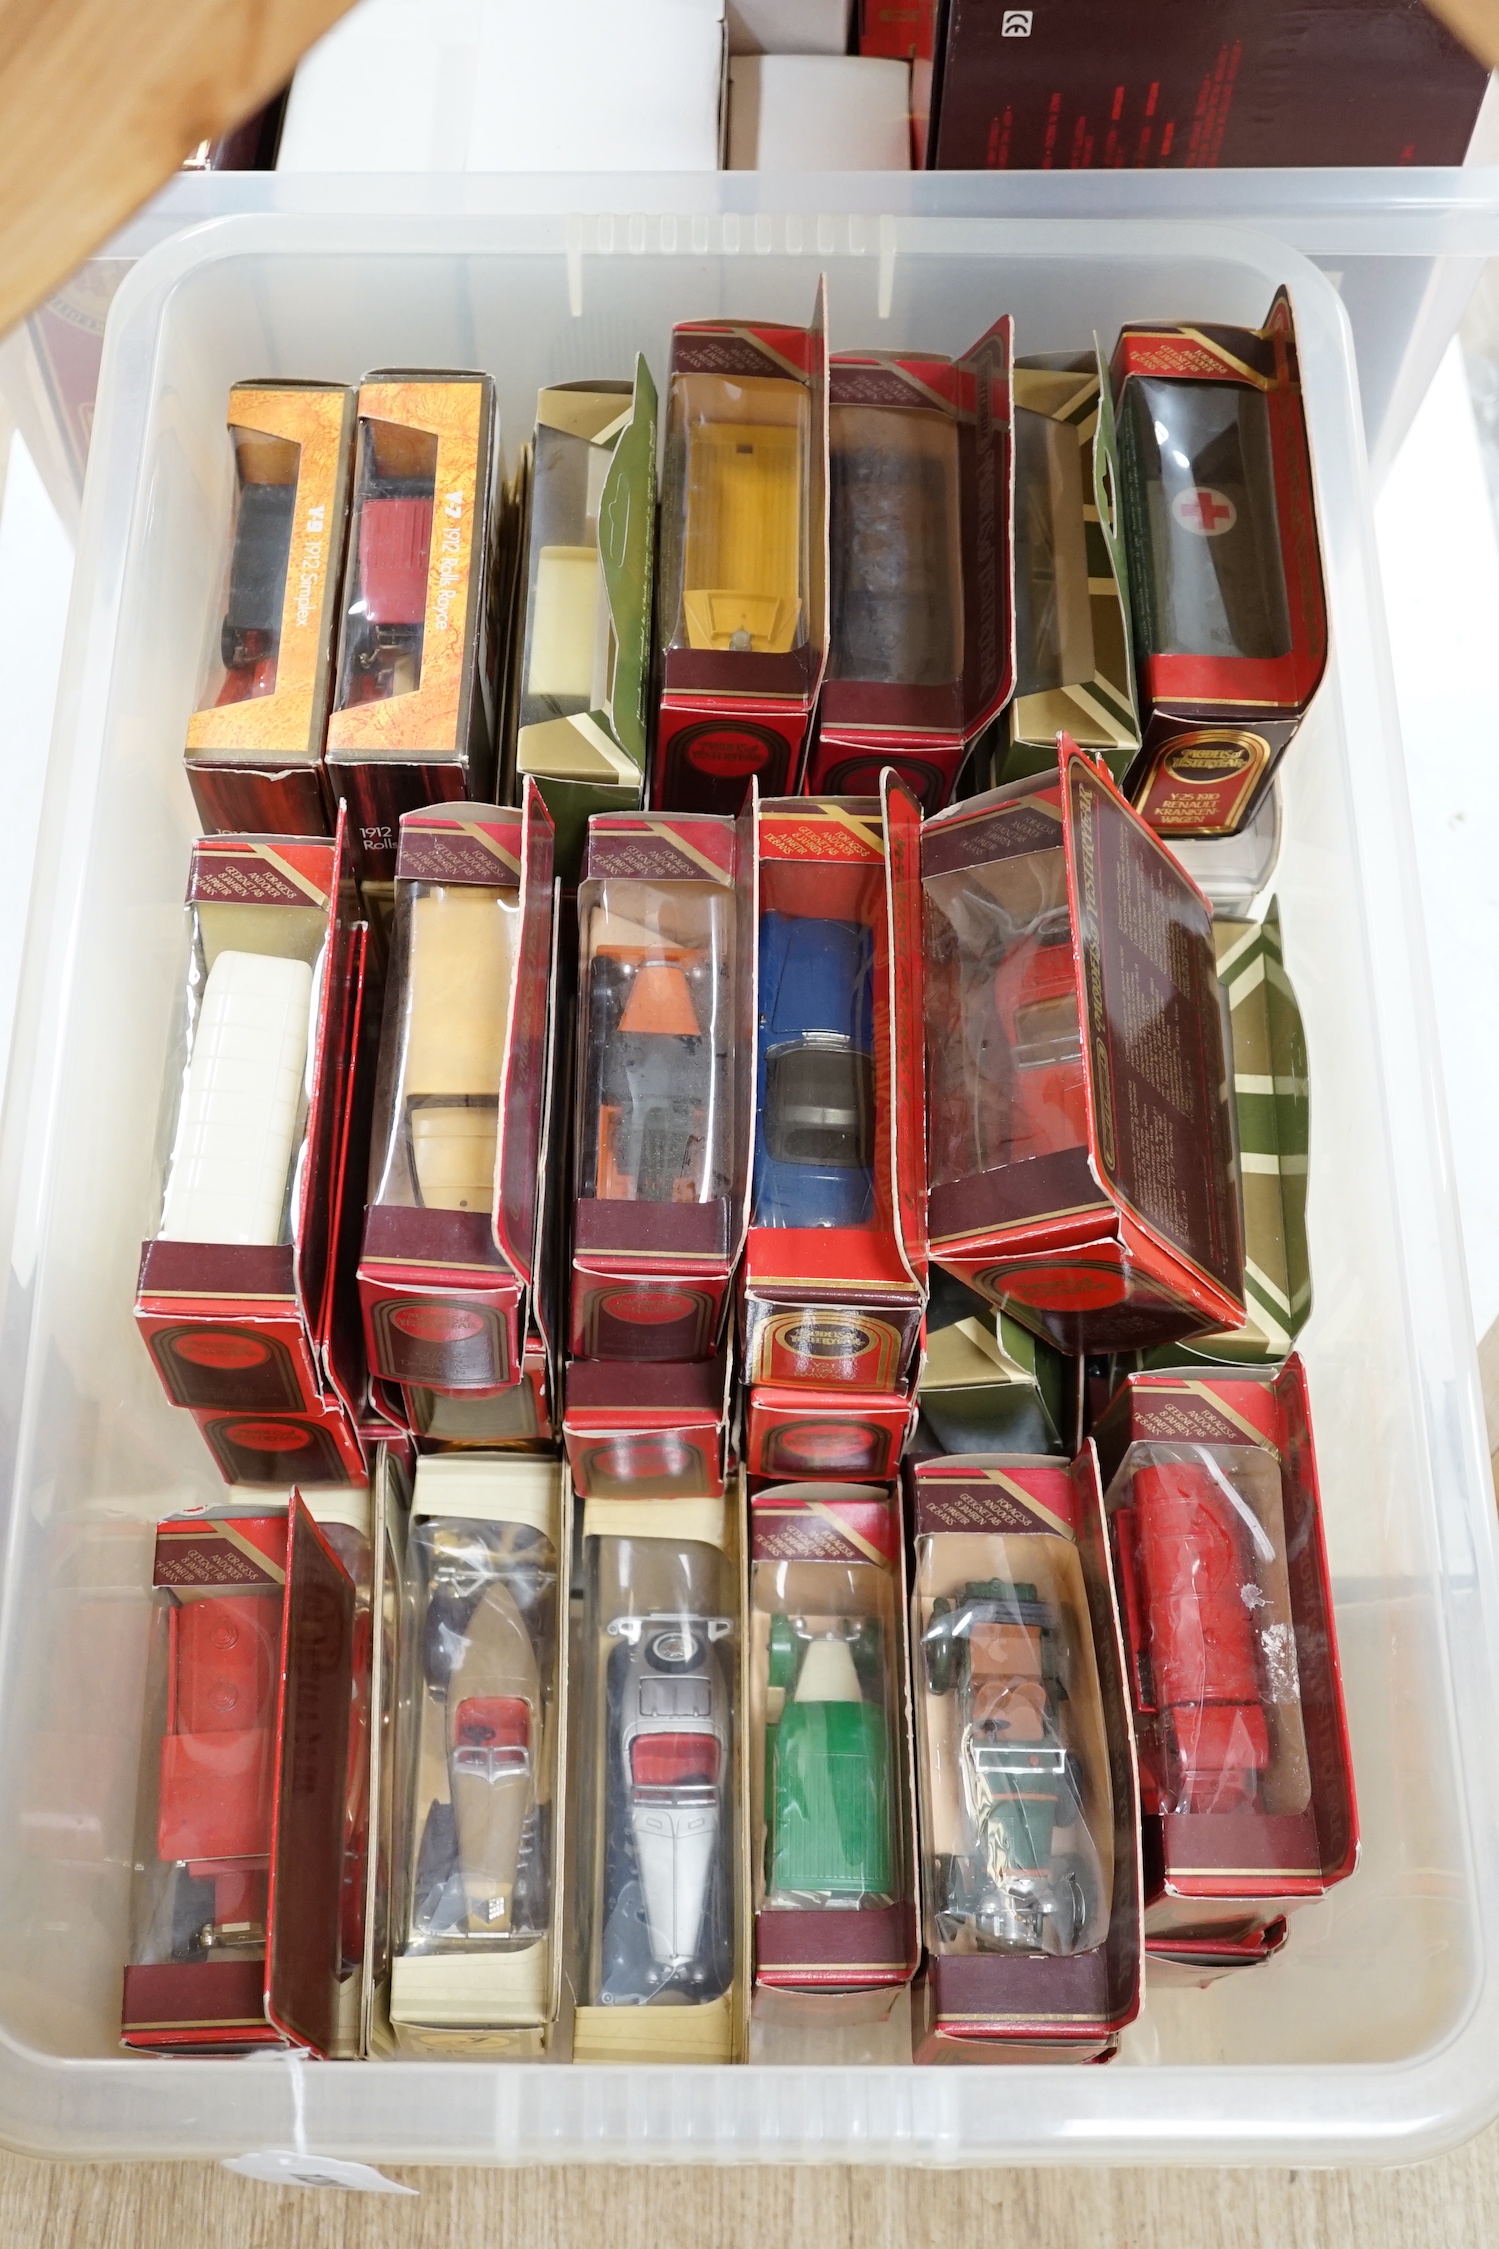 Ninety-five boxed Matchbox Models of Yesteryear, in a variety of different Matchbox era boxes